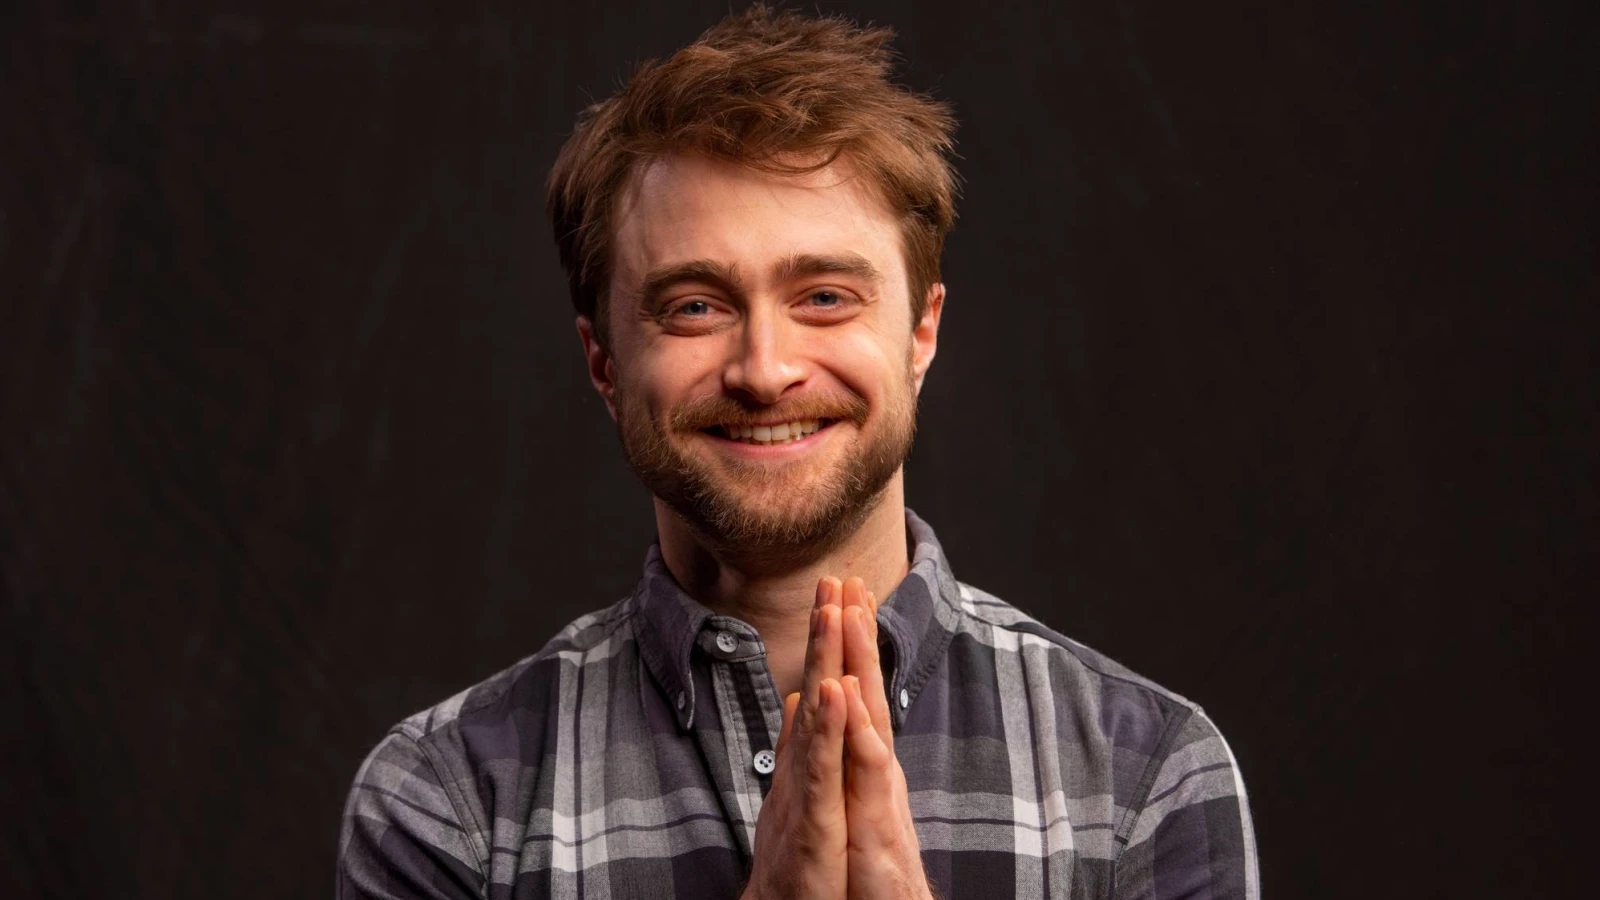 Daniel Radcliffe will become a father: his girlfriend is expecting their first child